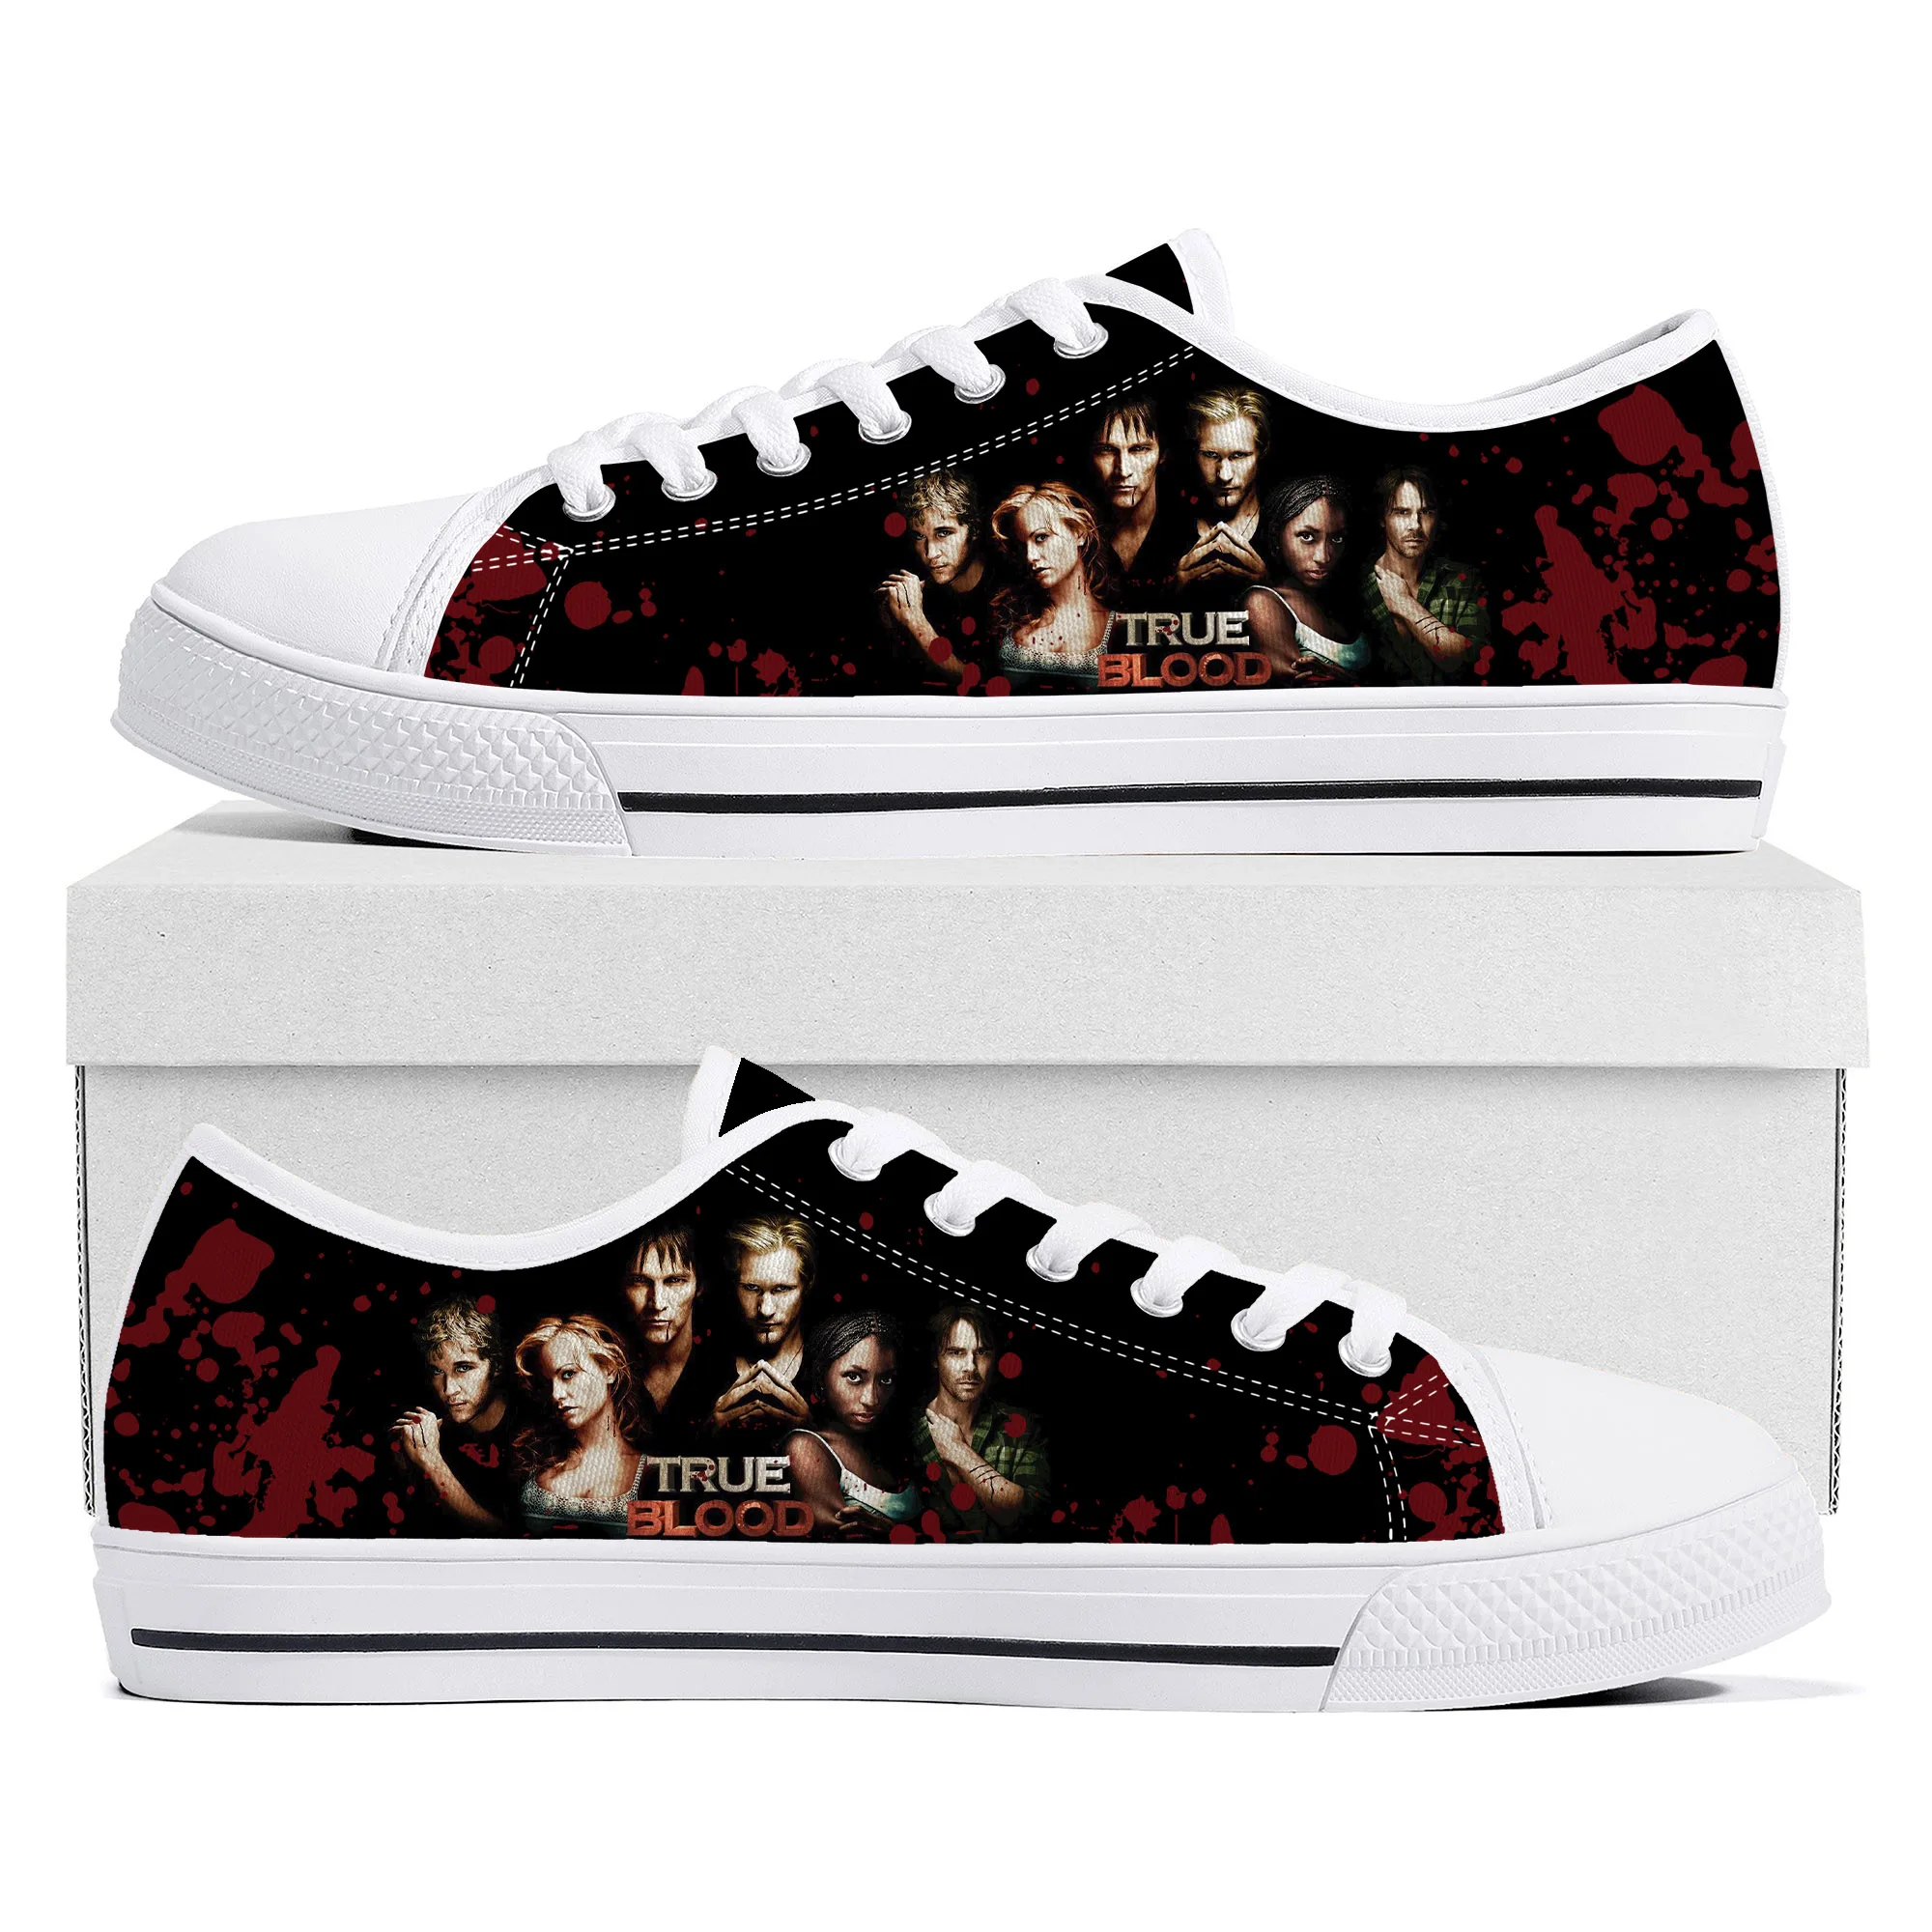 

True Blood Low Top Sneakers Mens Womens Teenager Anna Paquin Stephen Moyer Canvas Sneaker couple Casual Shoes Custom Made Shoe